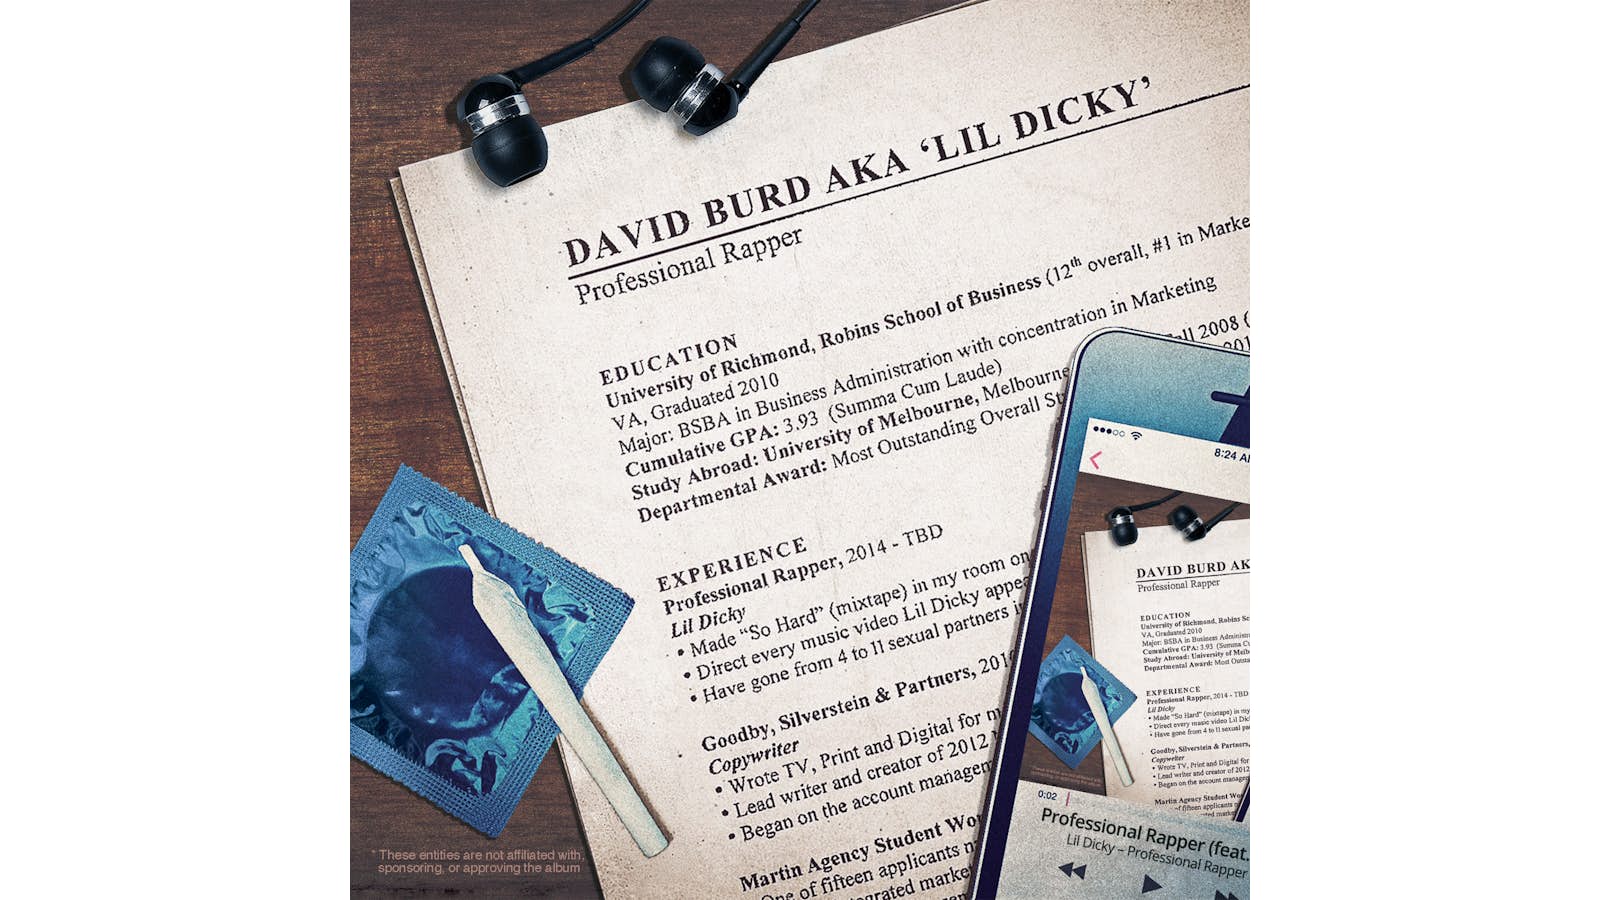 Lil Dicky Professional Rapper Record